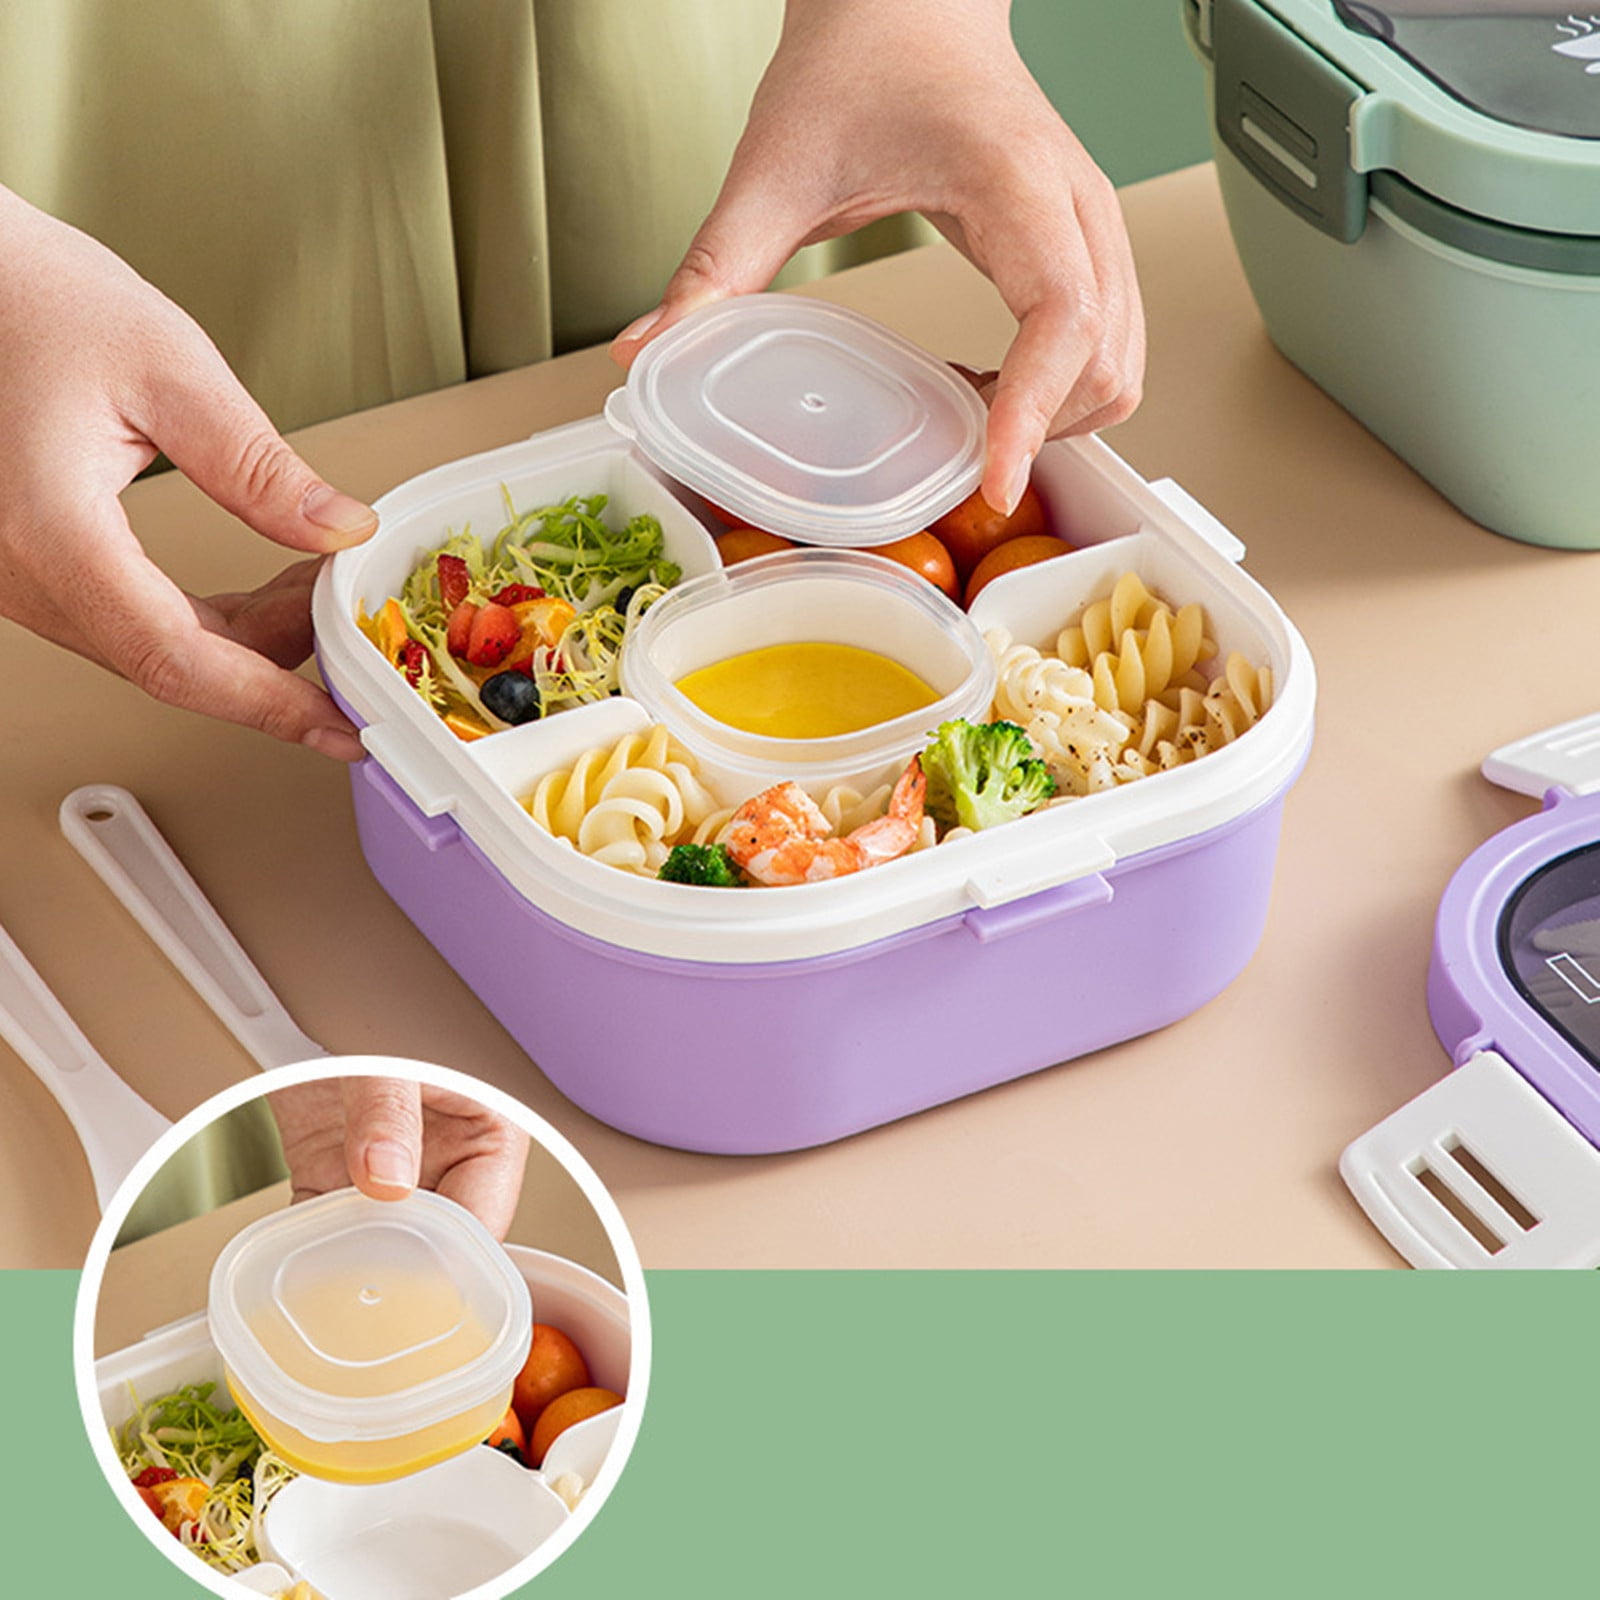 Aoujea Clearance Adult Lunch Box, 1000 ML 3-Compartment Bento